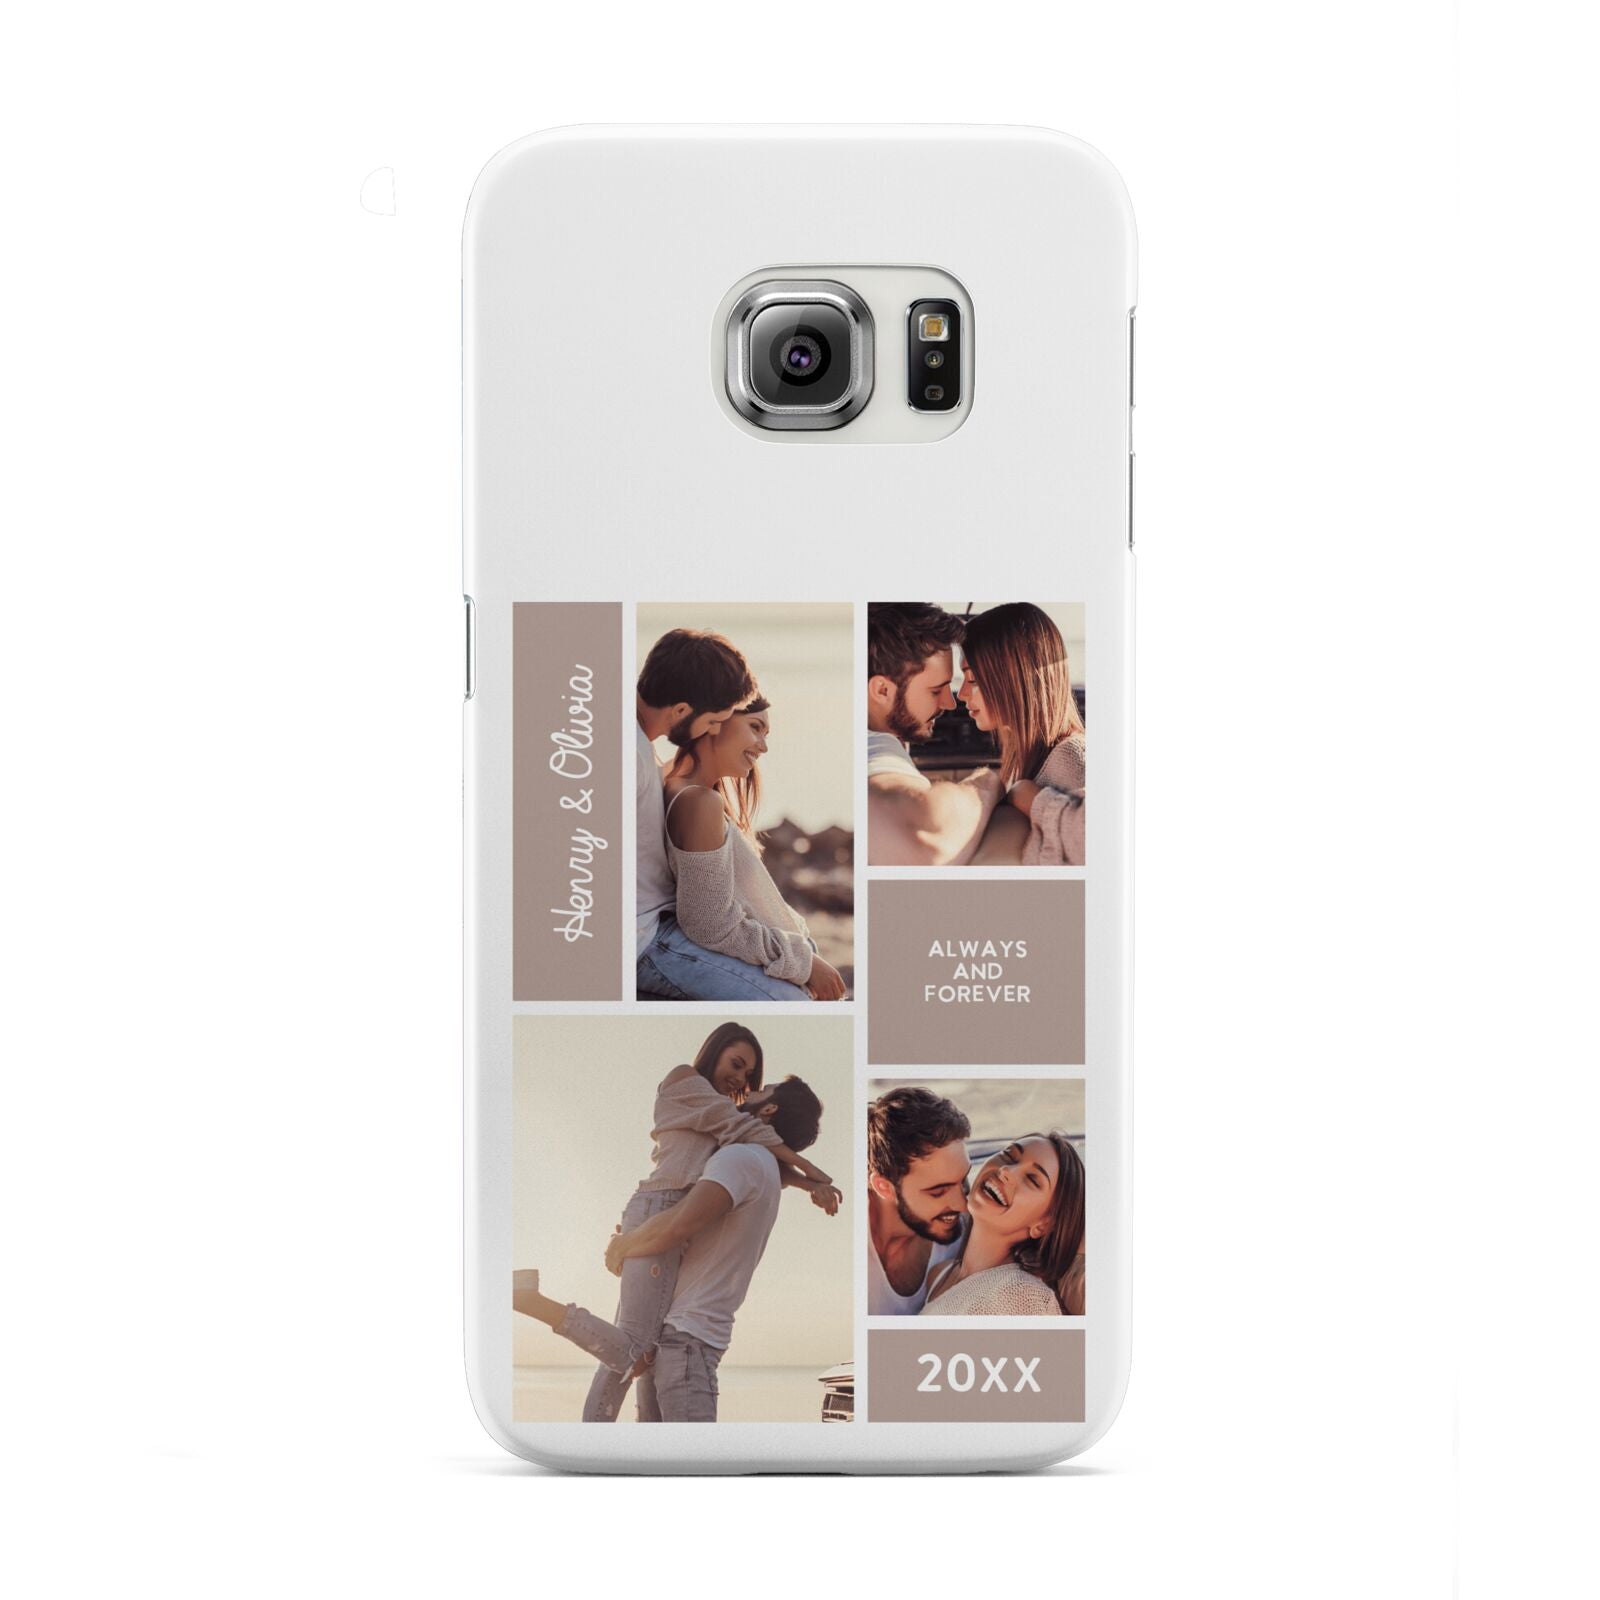 Couples Valentine Photo Collage Personalised Samsung Galaxy S6 Edge Case